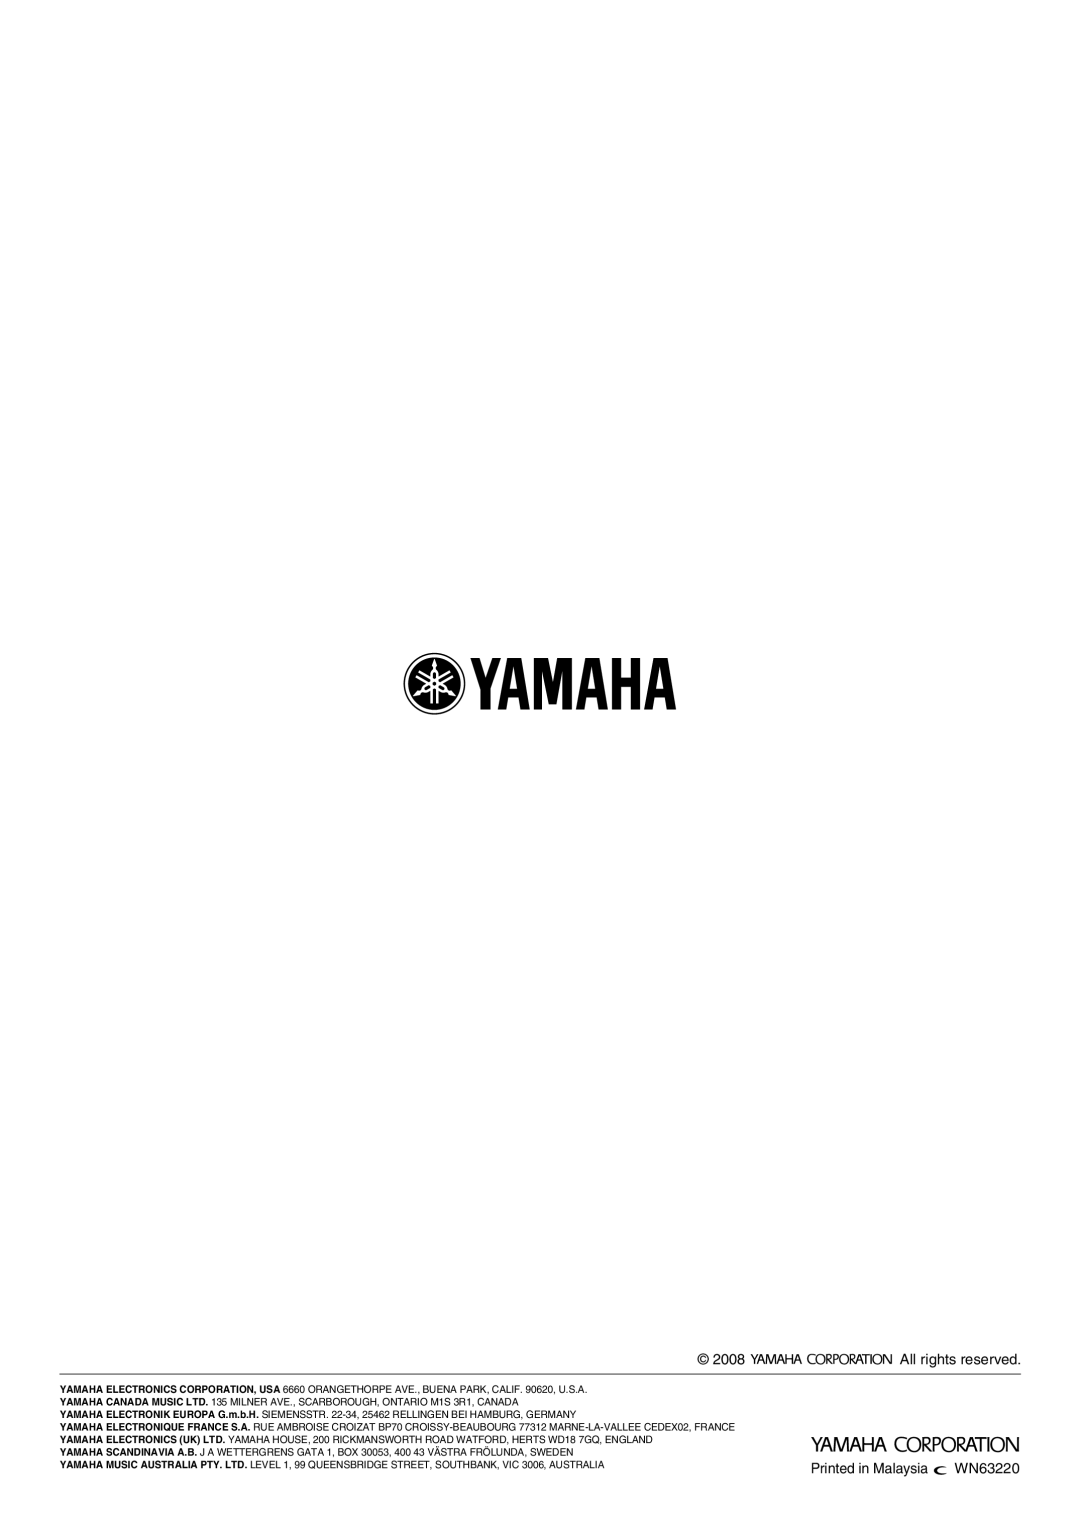 Yamaha CD-S1000 owner manual 2008, WN63220, All rights reserved 